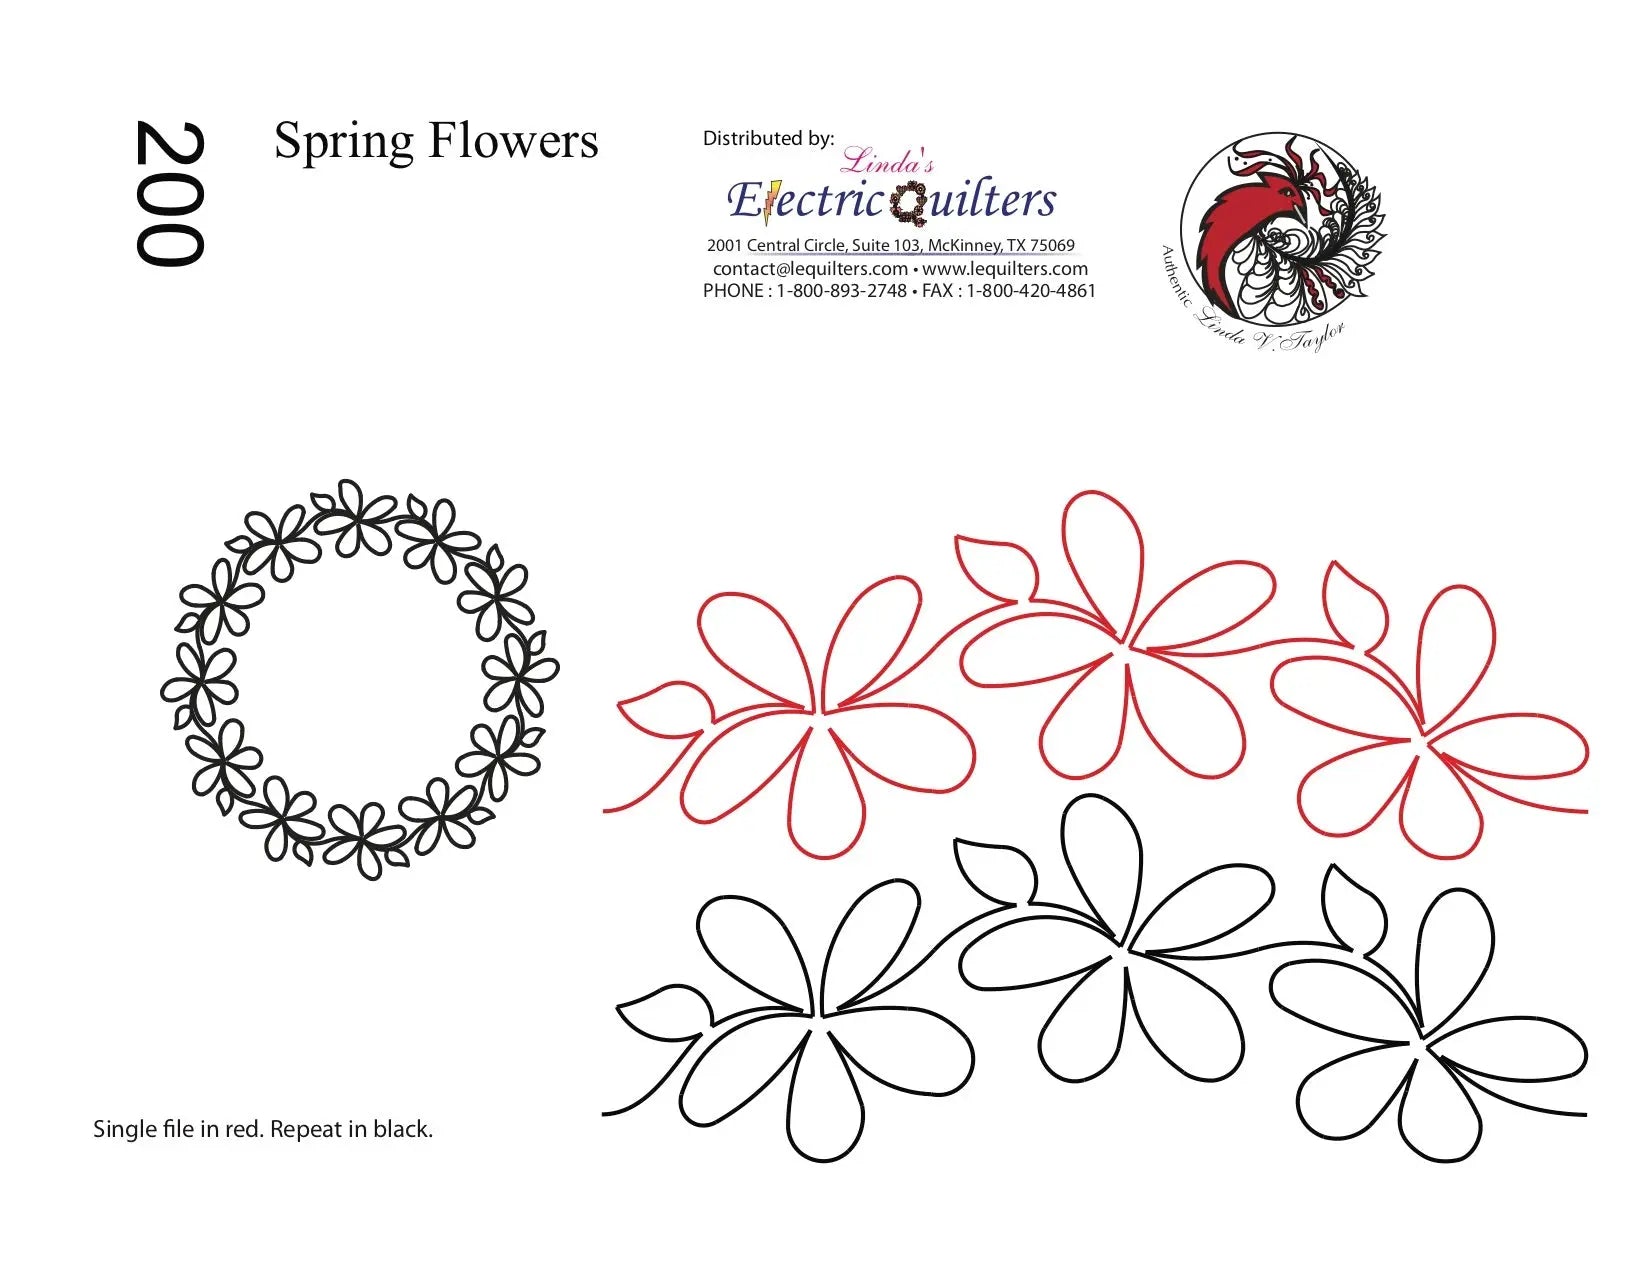 200 Spring Flowers Pantograph with Blocks by Linda V. Taylor - Linda's Electric Quilters